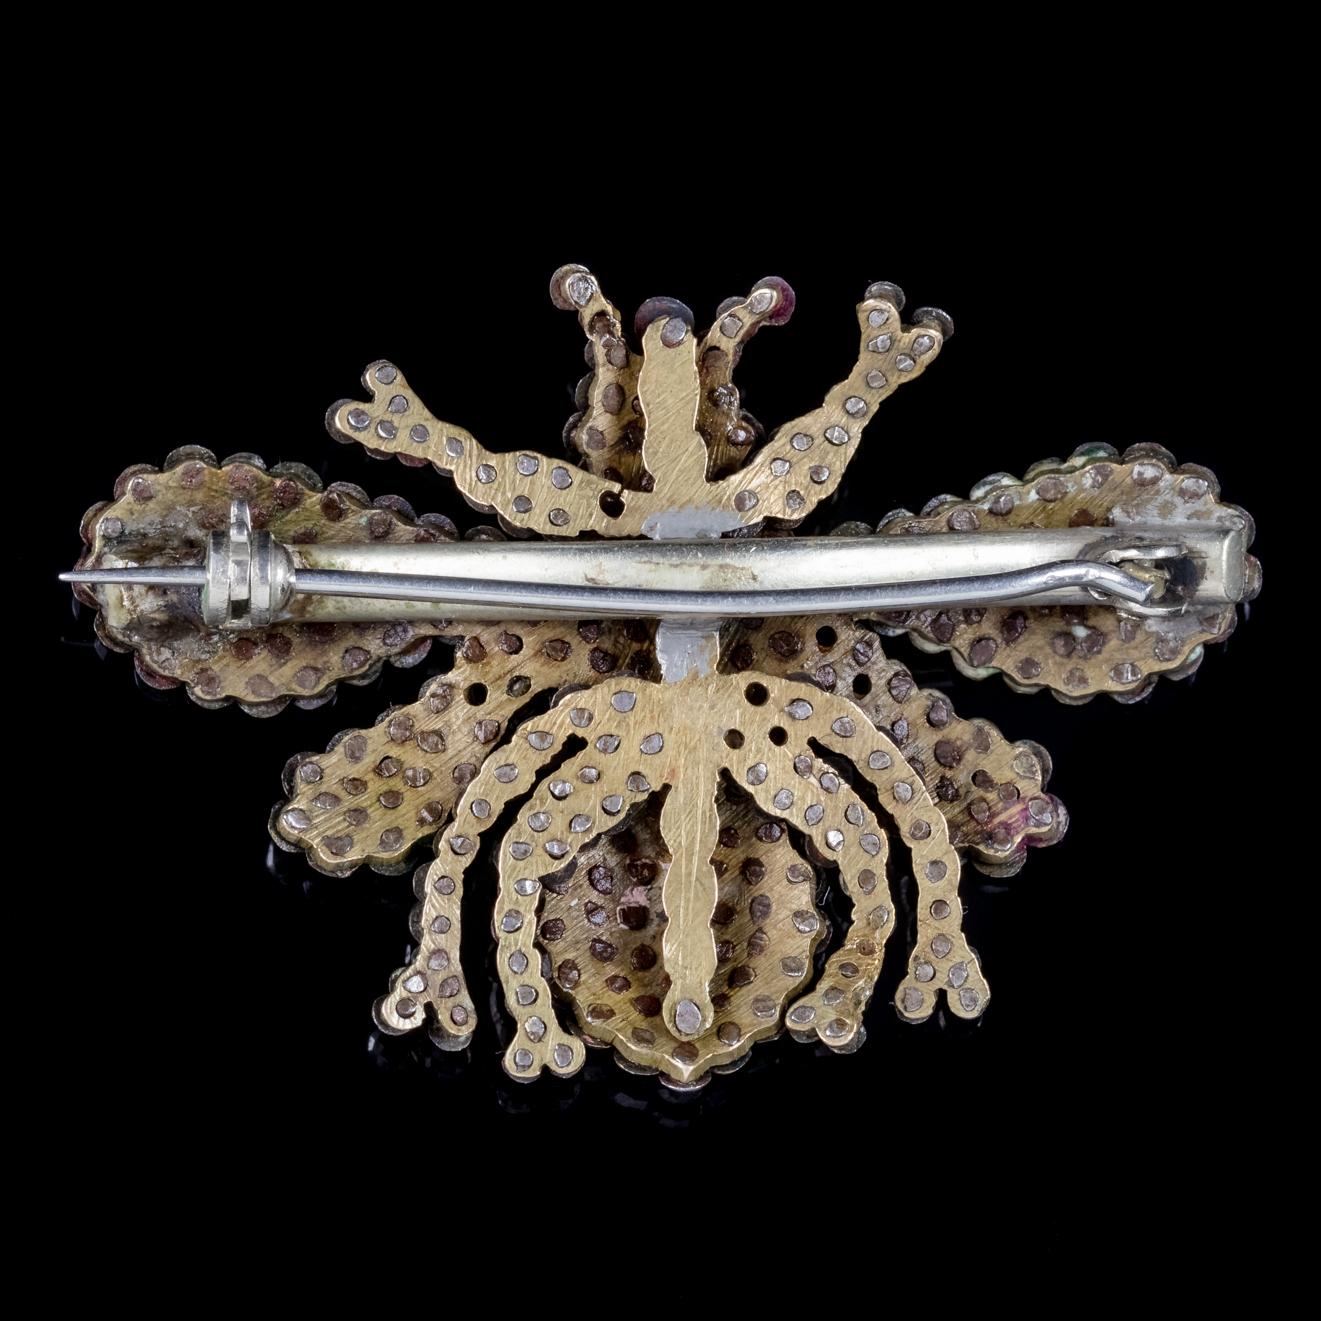 A wonderful antique Georgian bee brooch C. 1790, decorated with sparkling Cut Steel studs throughout the piece. 

Cut-steel jewellery is set with faceted and polished steel studs that resemble gemstones. This type of jewellery was popular during the